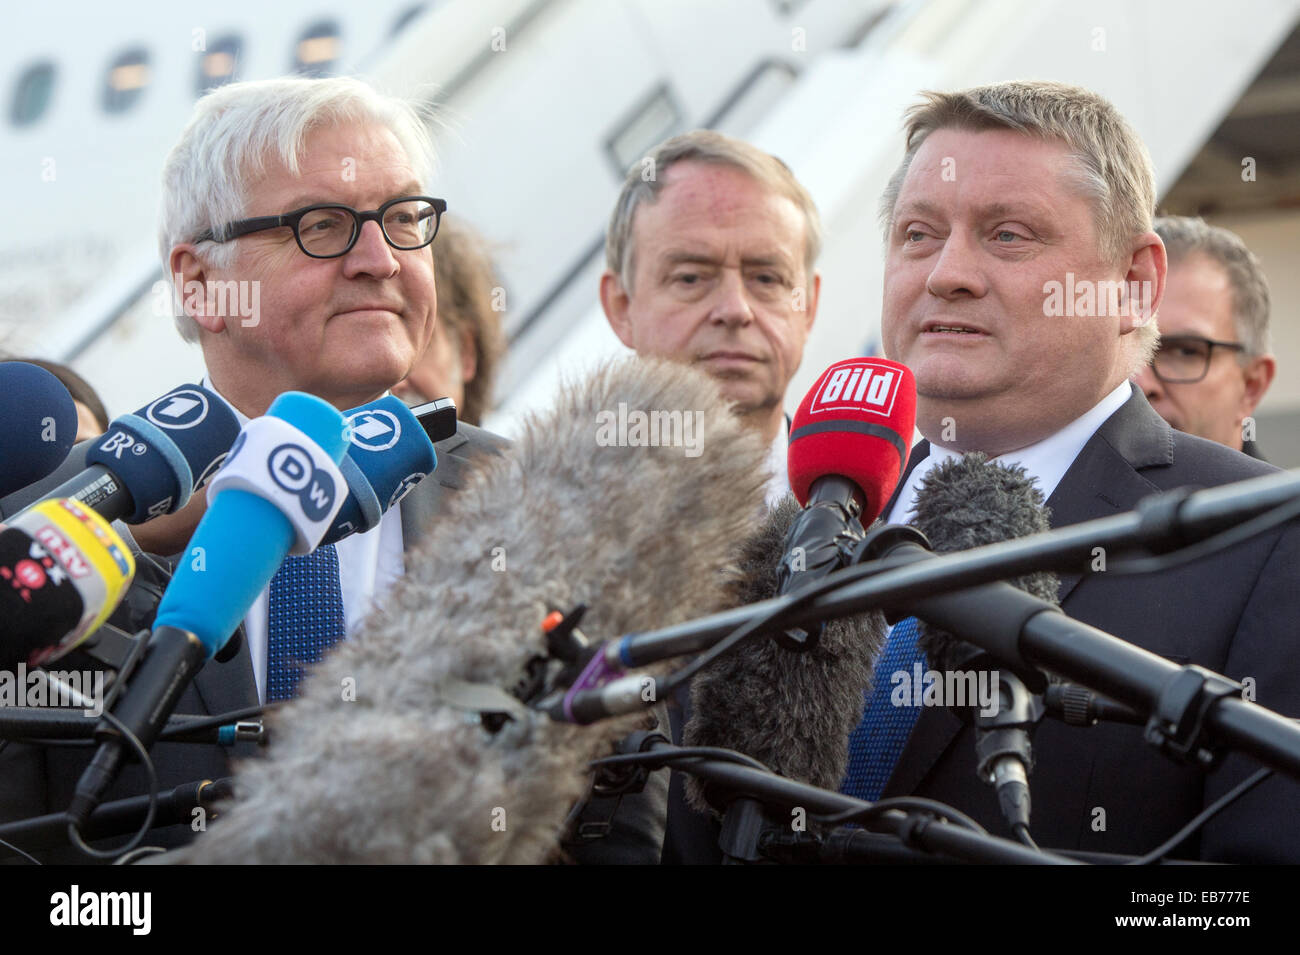 Berlin, Germany. 27th Nov, 2014. German Foreign Minister Frank-Walter Steinmeier (L) and Health Minister Hermann Groehe make a statement after touring the 'Robert Koch' evacuation plane at Tegel Airport in Berlin, Germany, 27 November 2014. The Airbus A340 has an isolation unit for highly infectious patients with for example ebola. Photo: MAURIZIO GAMBARINI/dpa/Alamy Live News Stock Photo